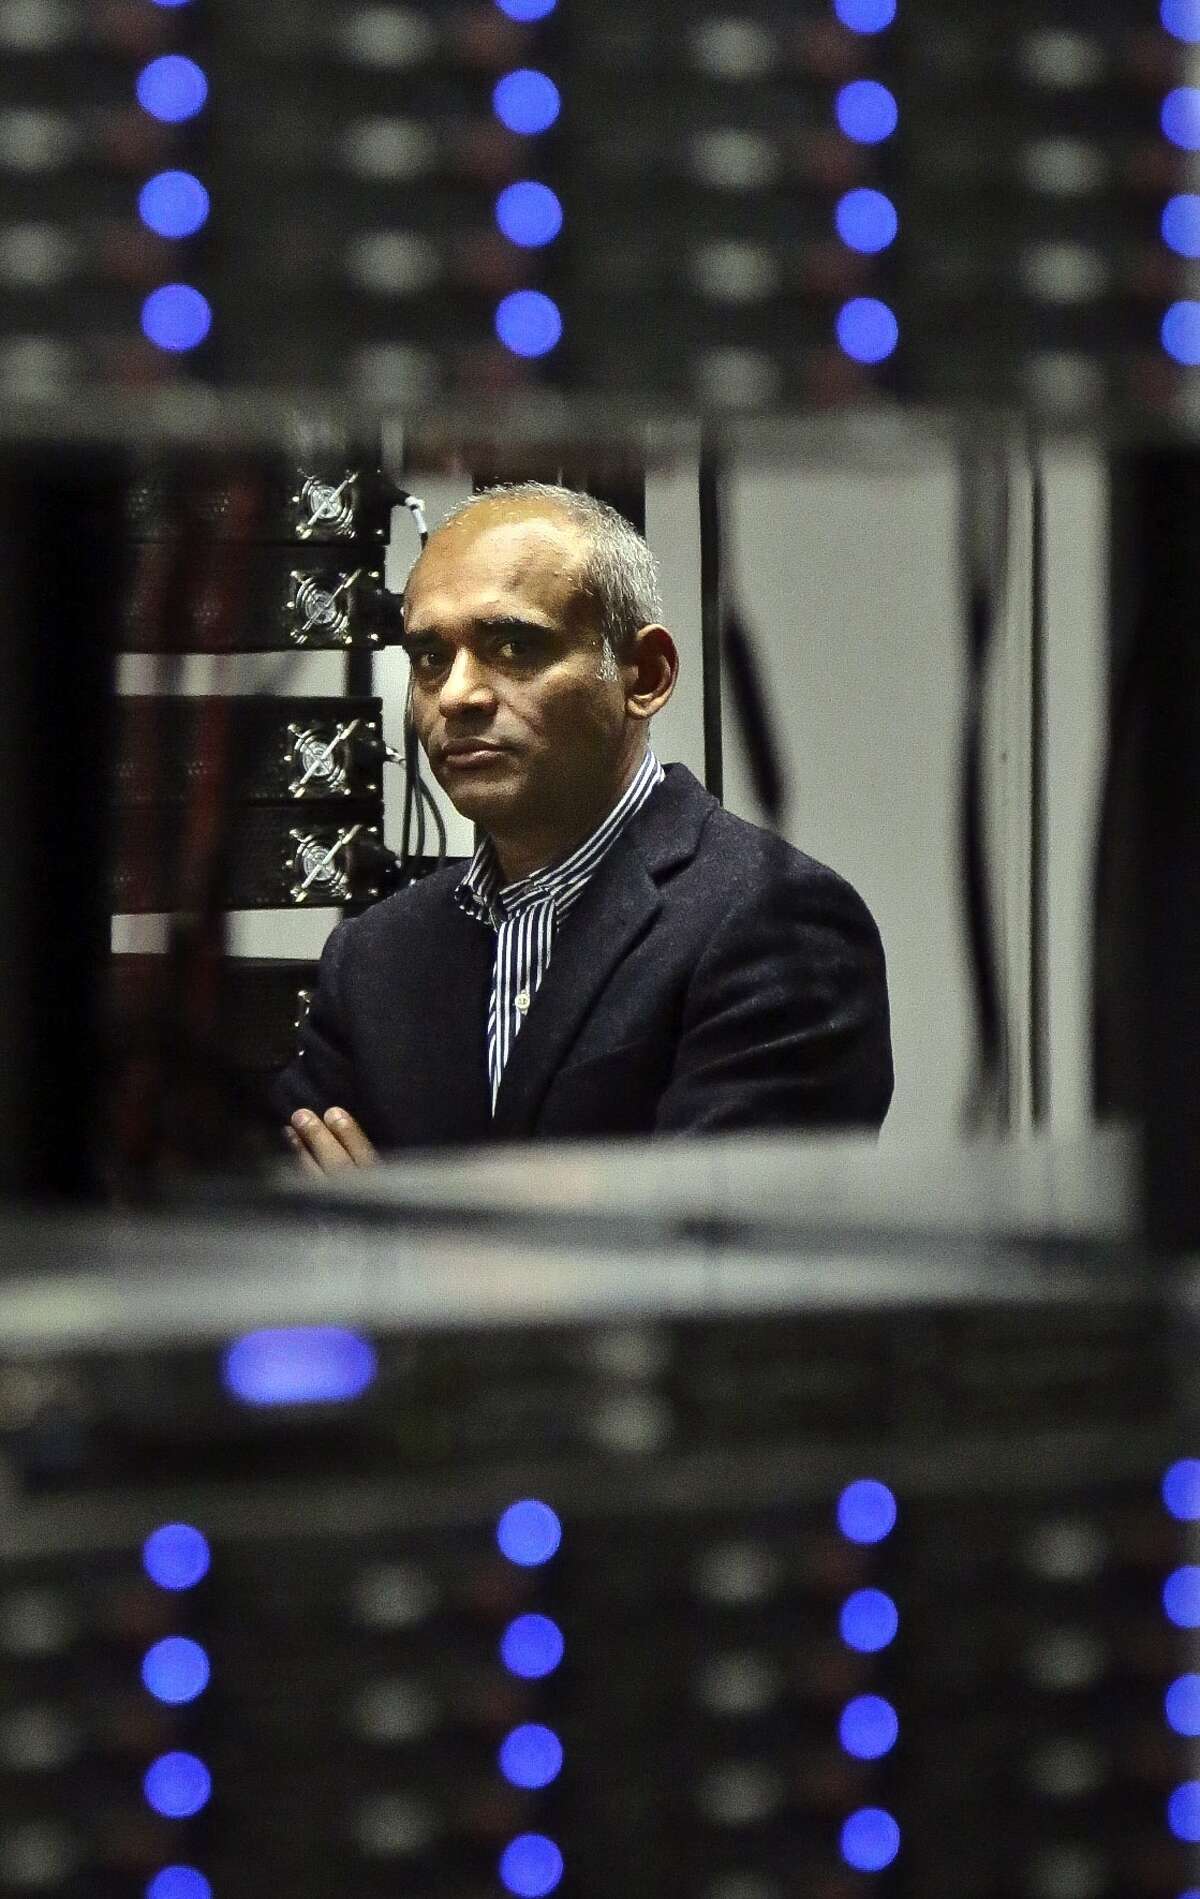 FILE - In this Thursday, Dec. 20, 2012, file photo, Chet Kanojia, founder and CEO of Aereo, Inc., li